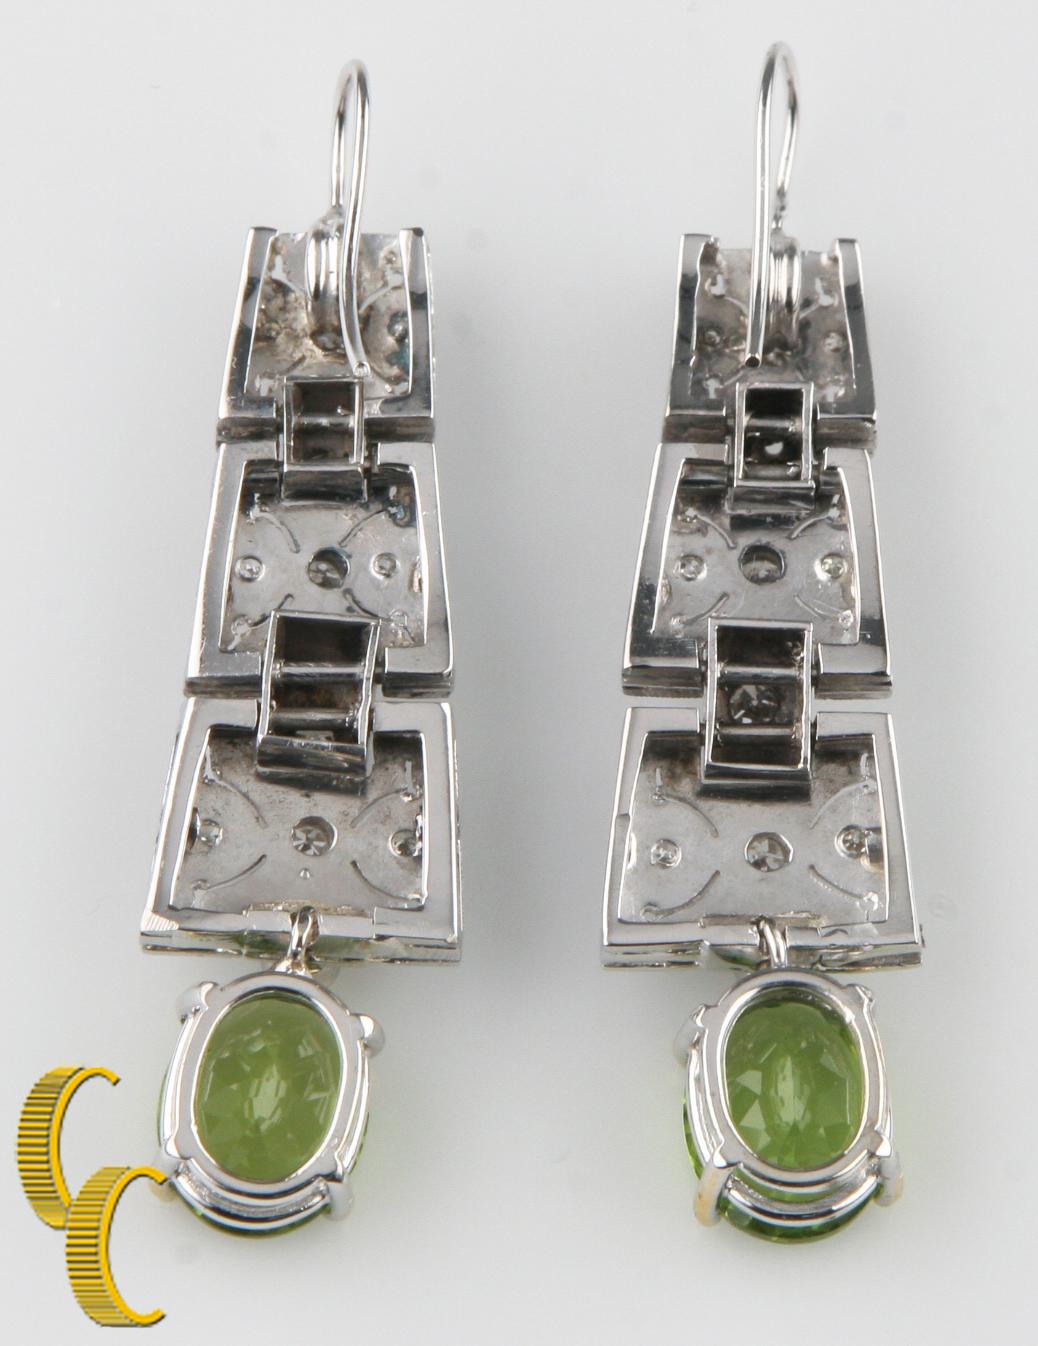 Gorgeous Unique Art Deco Style Jewelry
Feature Three 14k White Gold Plaques Encrusted w/ Round Brilliant Diamonds 
Total # of Diamonds = 24
Approximate Carat Weight = 0.90 ct
Average Color = H - I
Average Clarity = SI
Prong-Set Oval-Cut Green